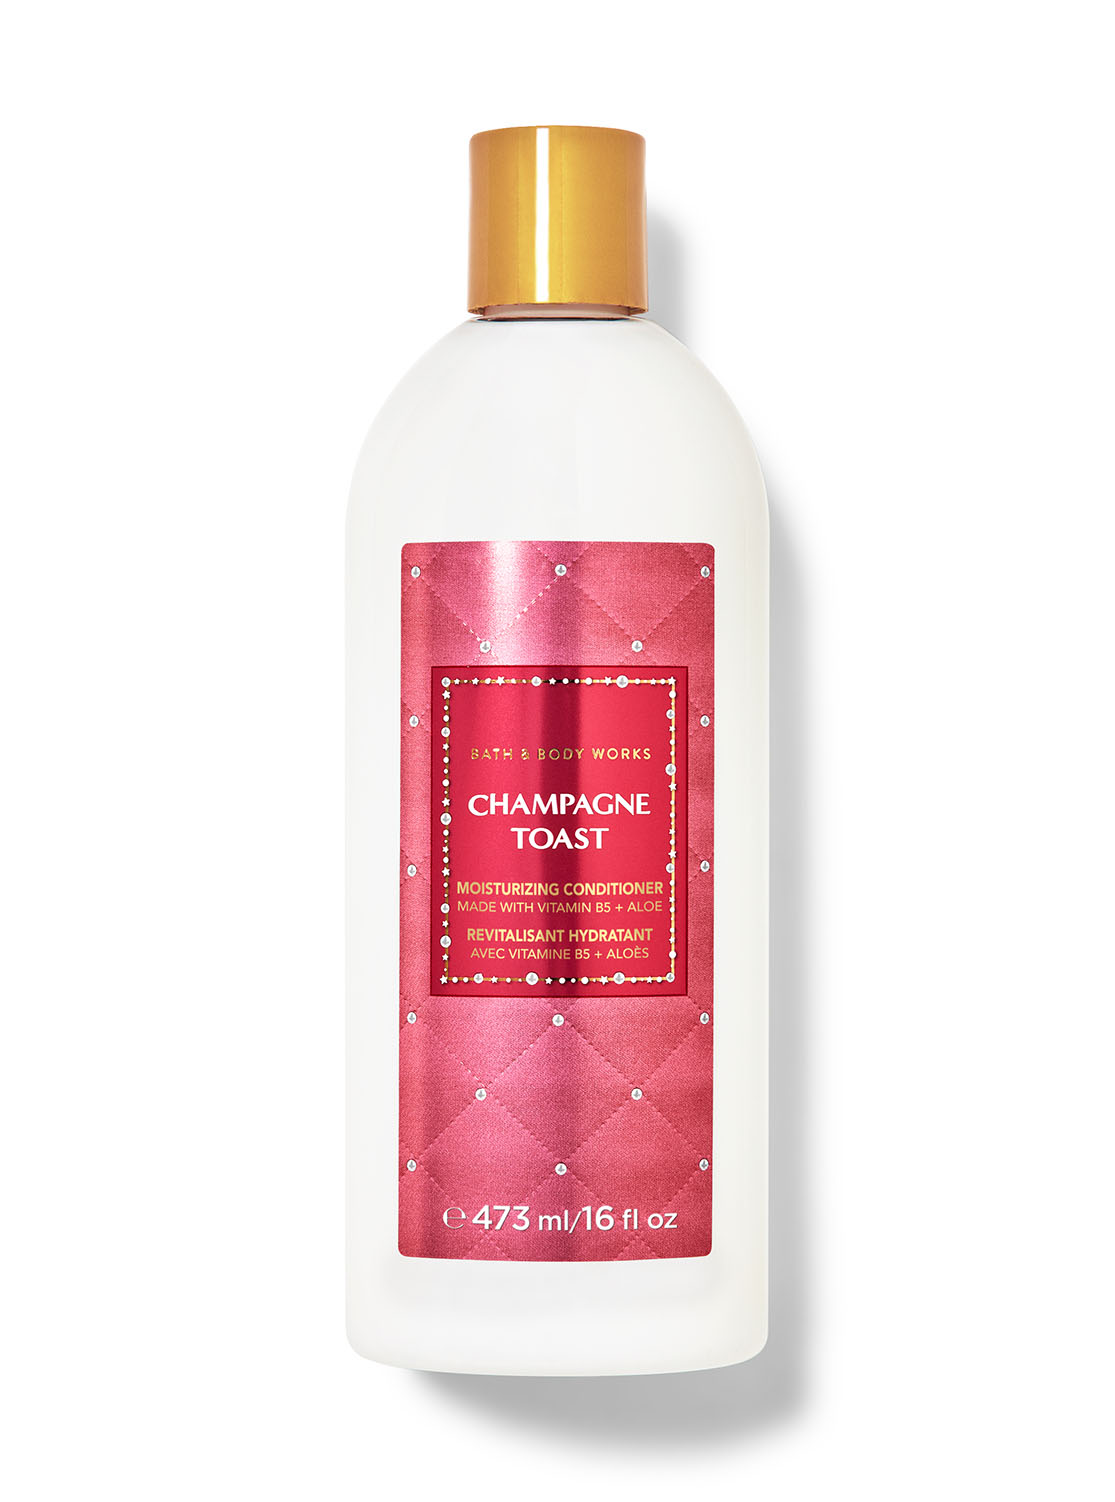 Champagne Toast Moisturizing Conditioner | Bath and Body Works